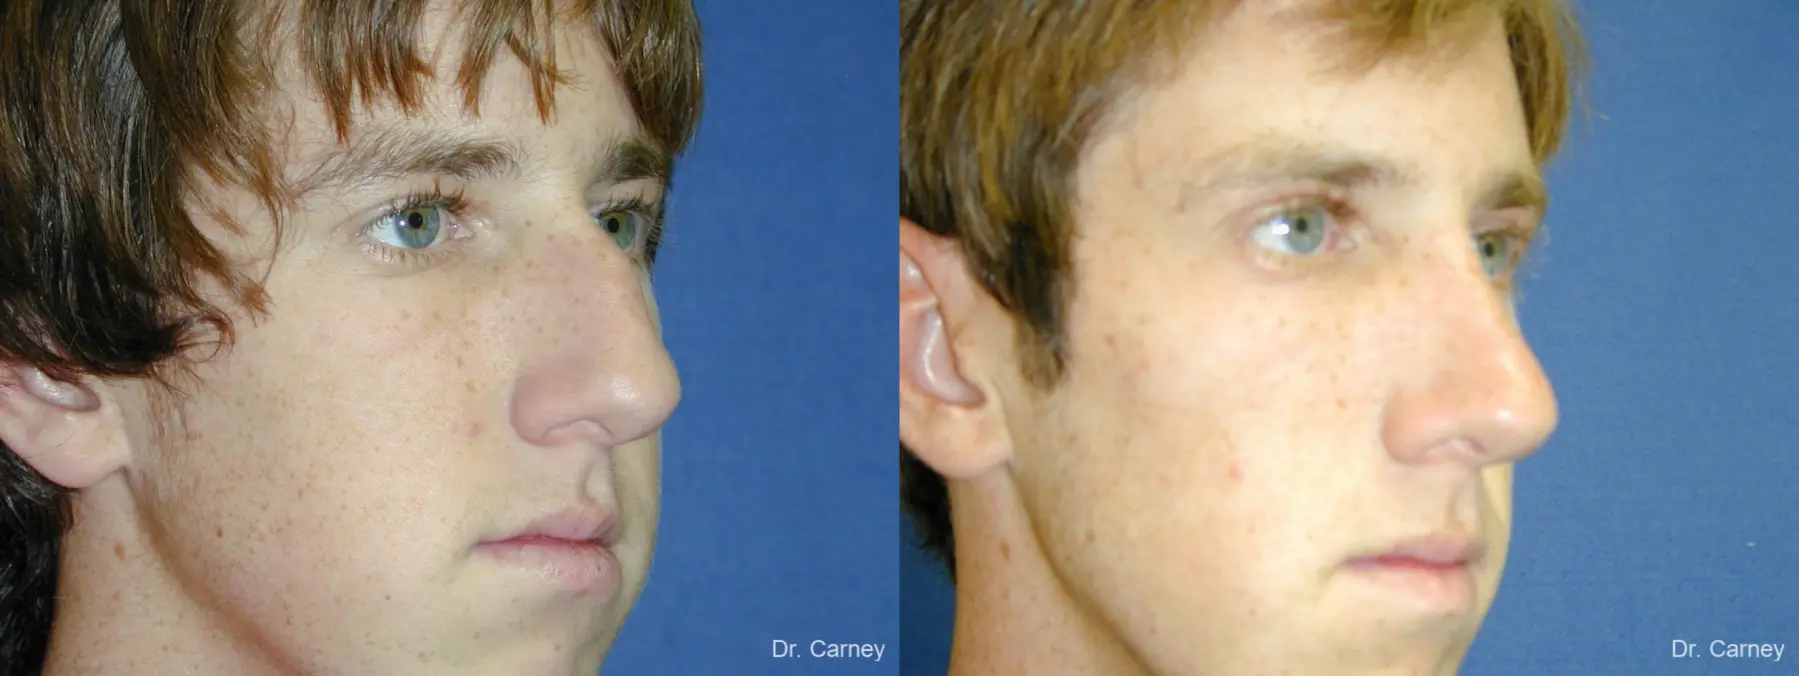 Virginia Beach Rhinoplasty 1219 - Before and After 3